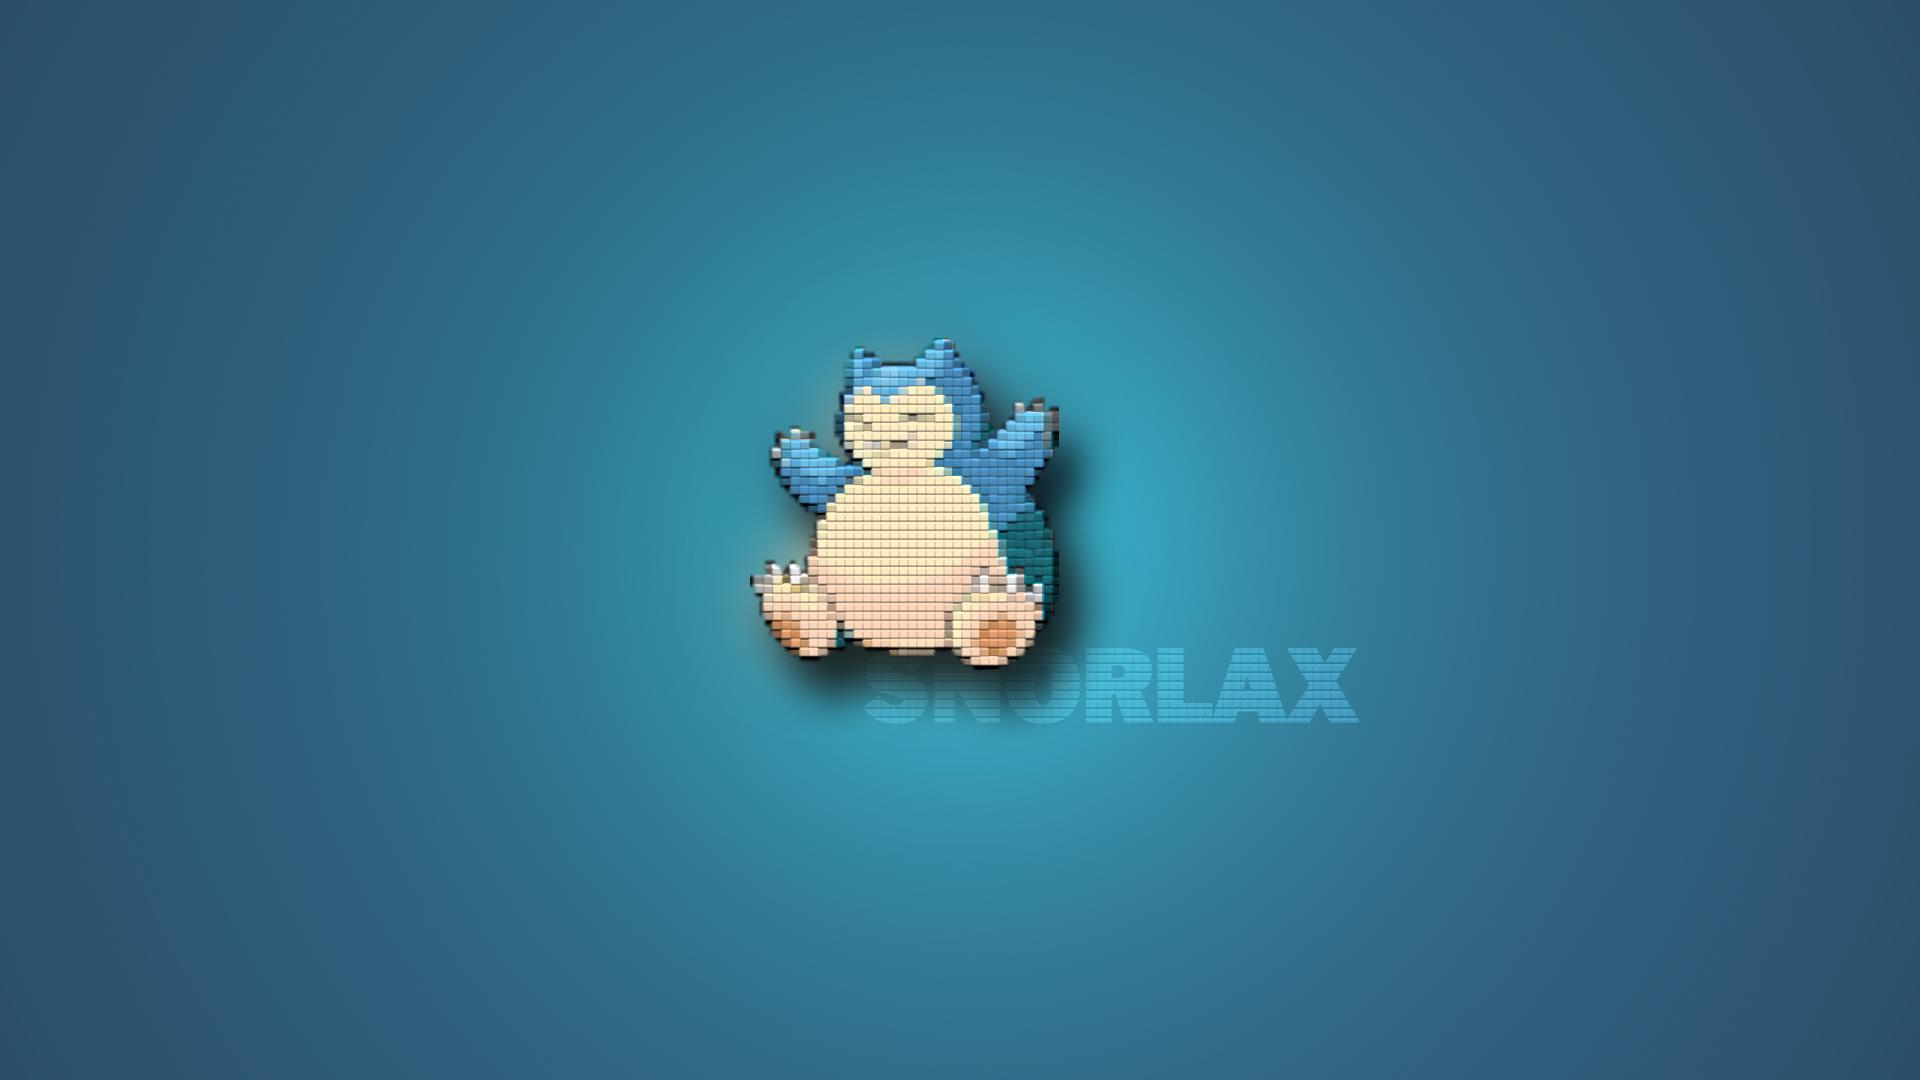 1920x1080 Snorlax Wallpaper Made by Me Imgur